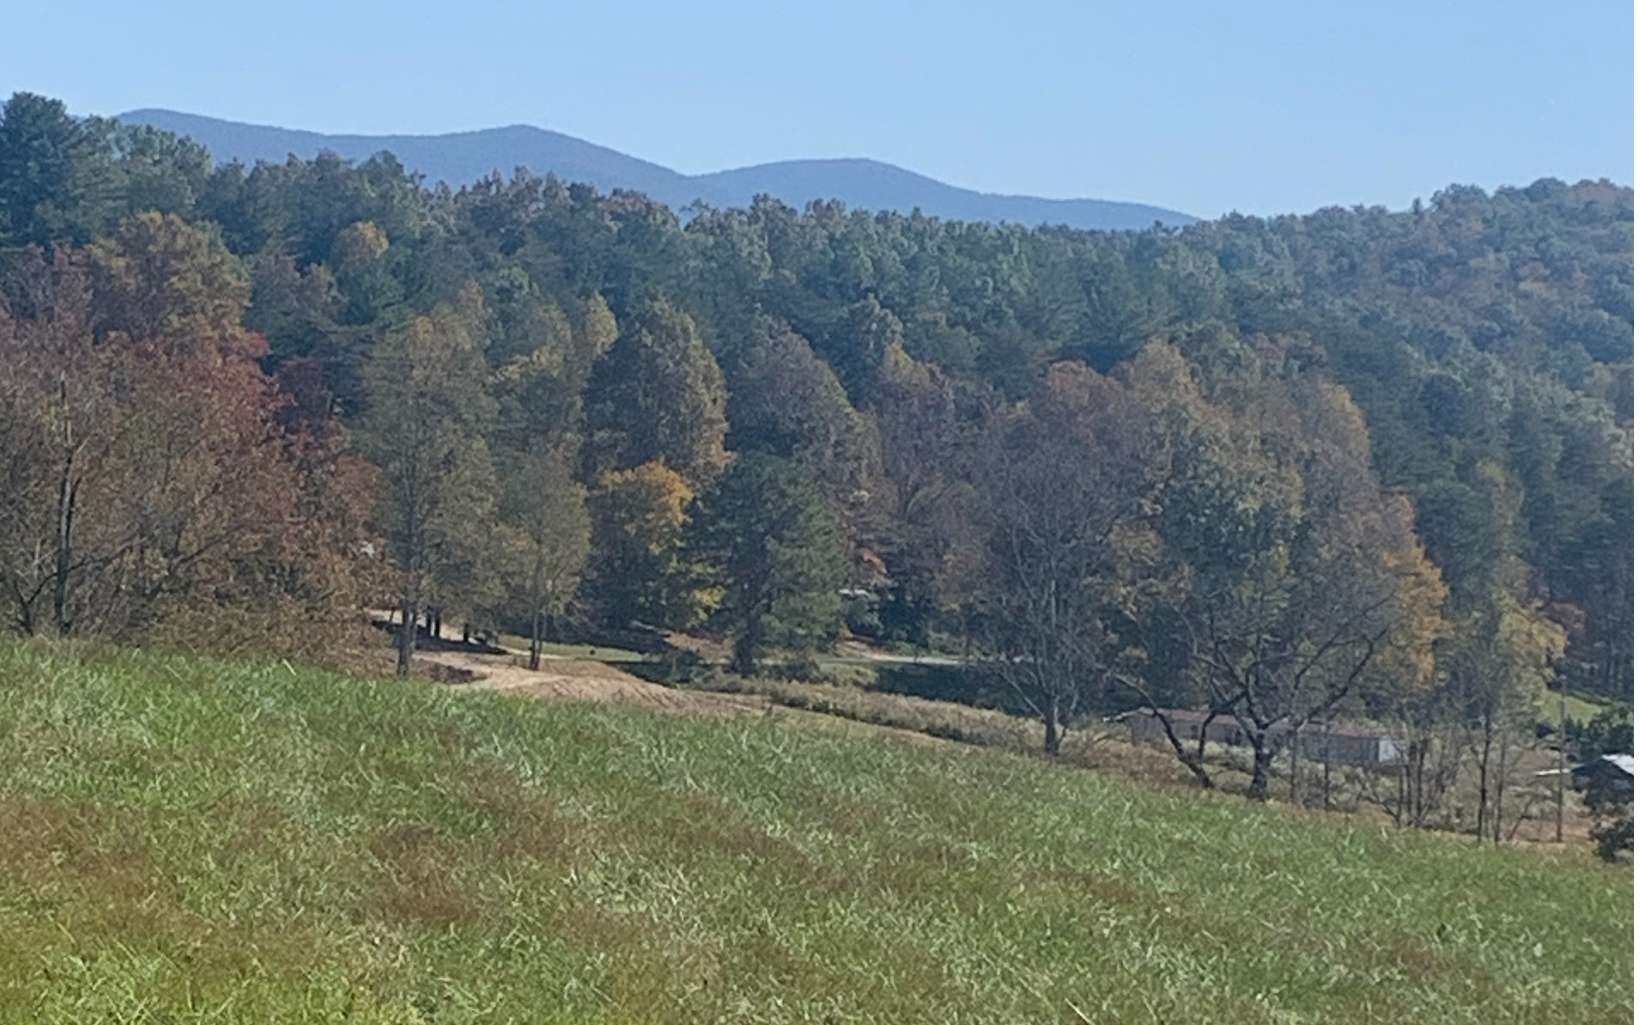 Looking for a great lot less than 5 miles to downtown Blue Ridge then look no further!!! Build your Mountain Dream Home Overlooking Beautiful Farm Country yet only minutes to all that Blue Ridge has to offer! This is Mountain Living at it's best with Hiking, Biking, Trout Fishing, River Rafting and Boating just a 10 minute drive away! Grab your builder and get started today!